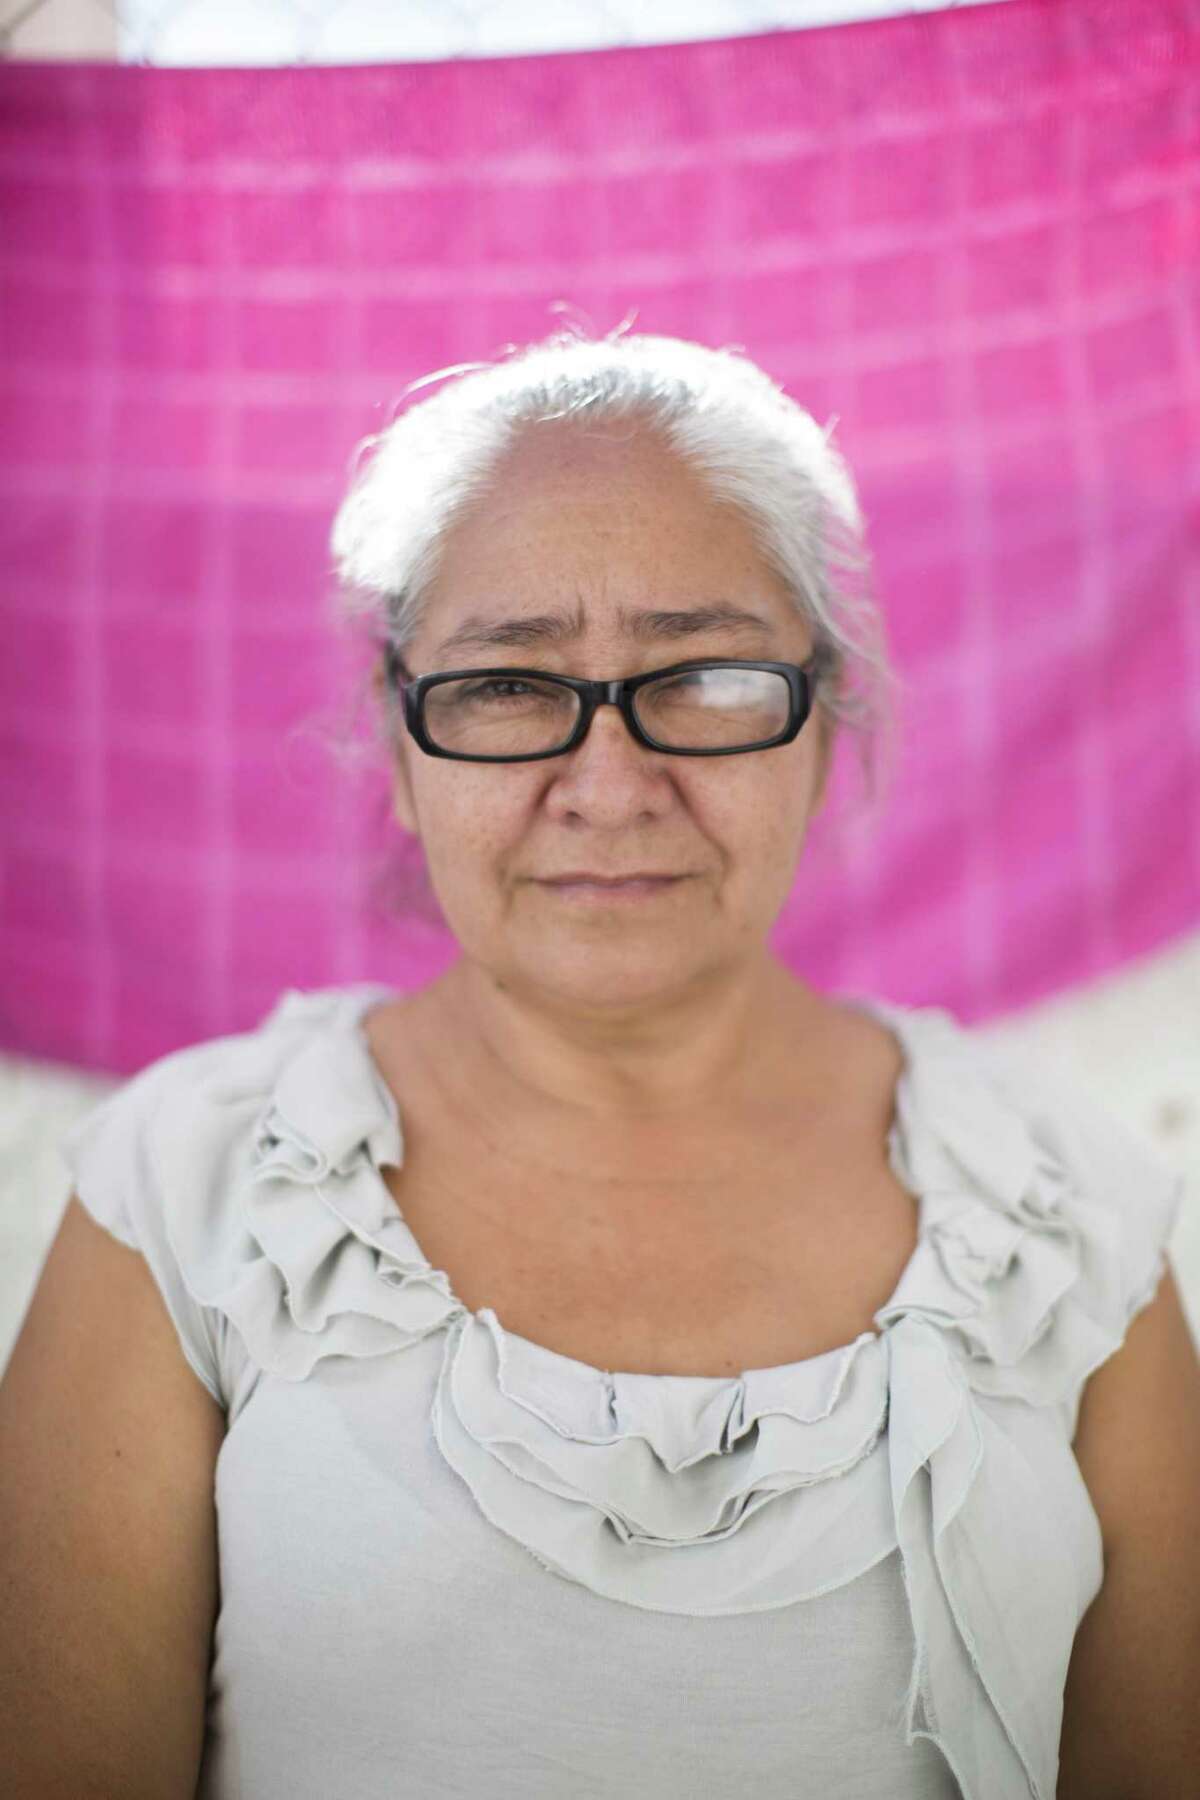 Juana Acosta, 53, a migrant from Honduras is taking shelter on Saturday, April 6, 2019, in Ciudad Juárez after the United States immigration authorities sent her to Mexico after being detained in United States. Acosta crossed into the United States with her granddaughters and now she doesn't know where they were sent to after they got detained.